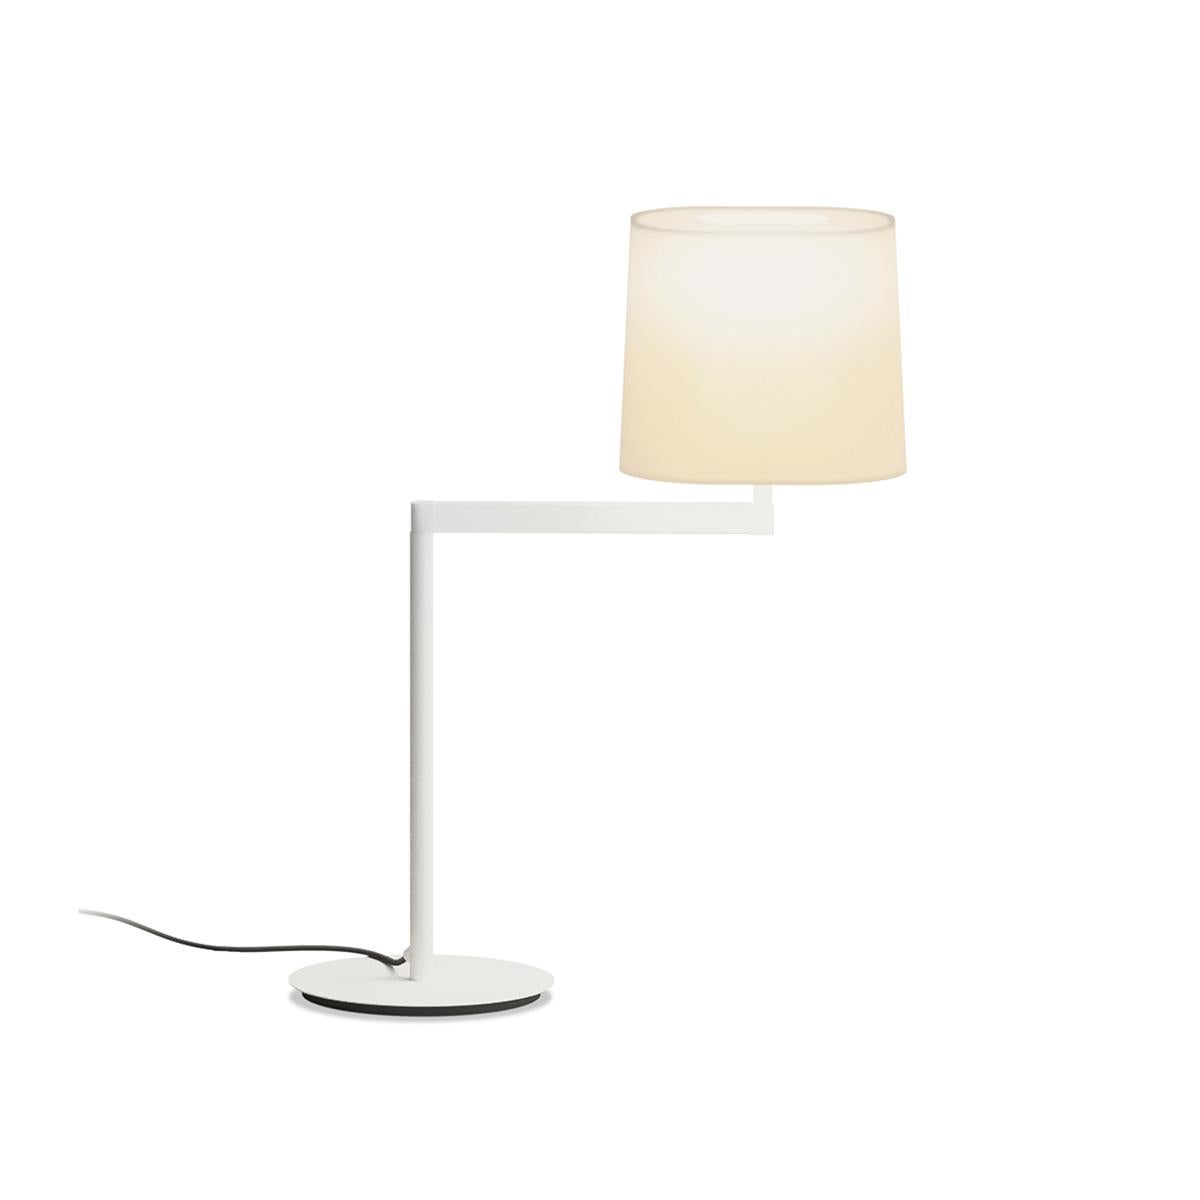 The Swing table lamp collection was updated to feature a new, clean look, as well as 2 new finishes. Each member of this family possesses a jointed arm allowing for a wide 180° range of motion for Directional ambient illumination. Collection